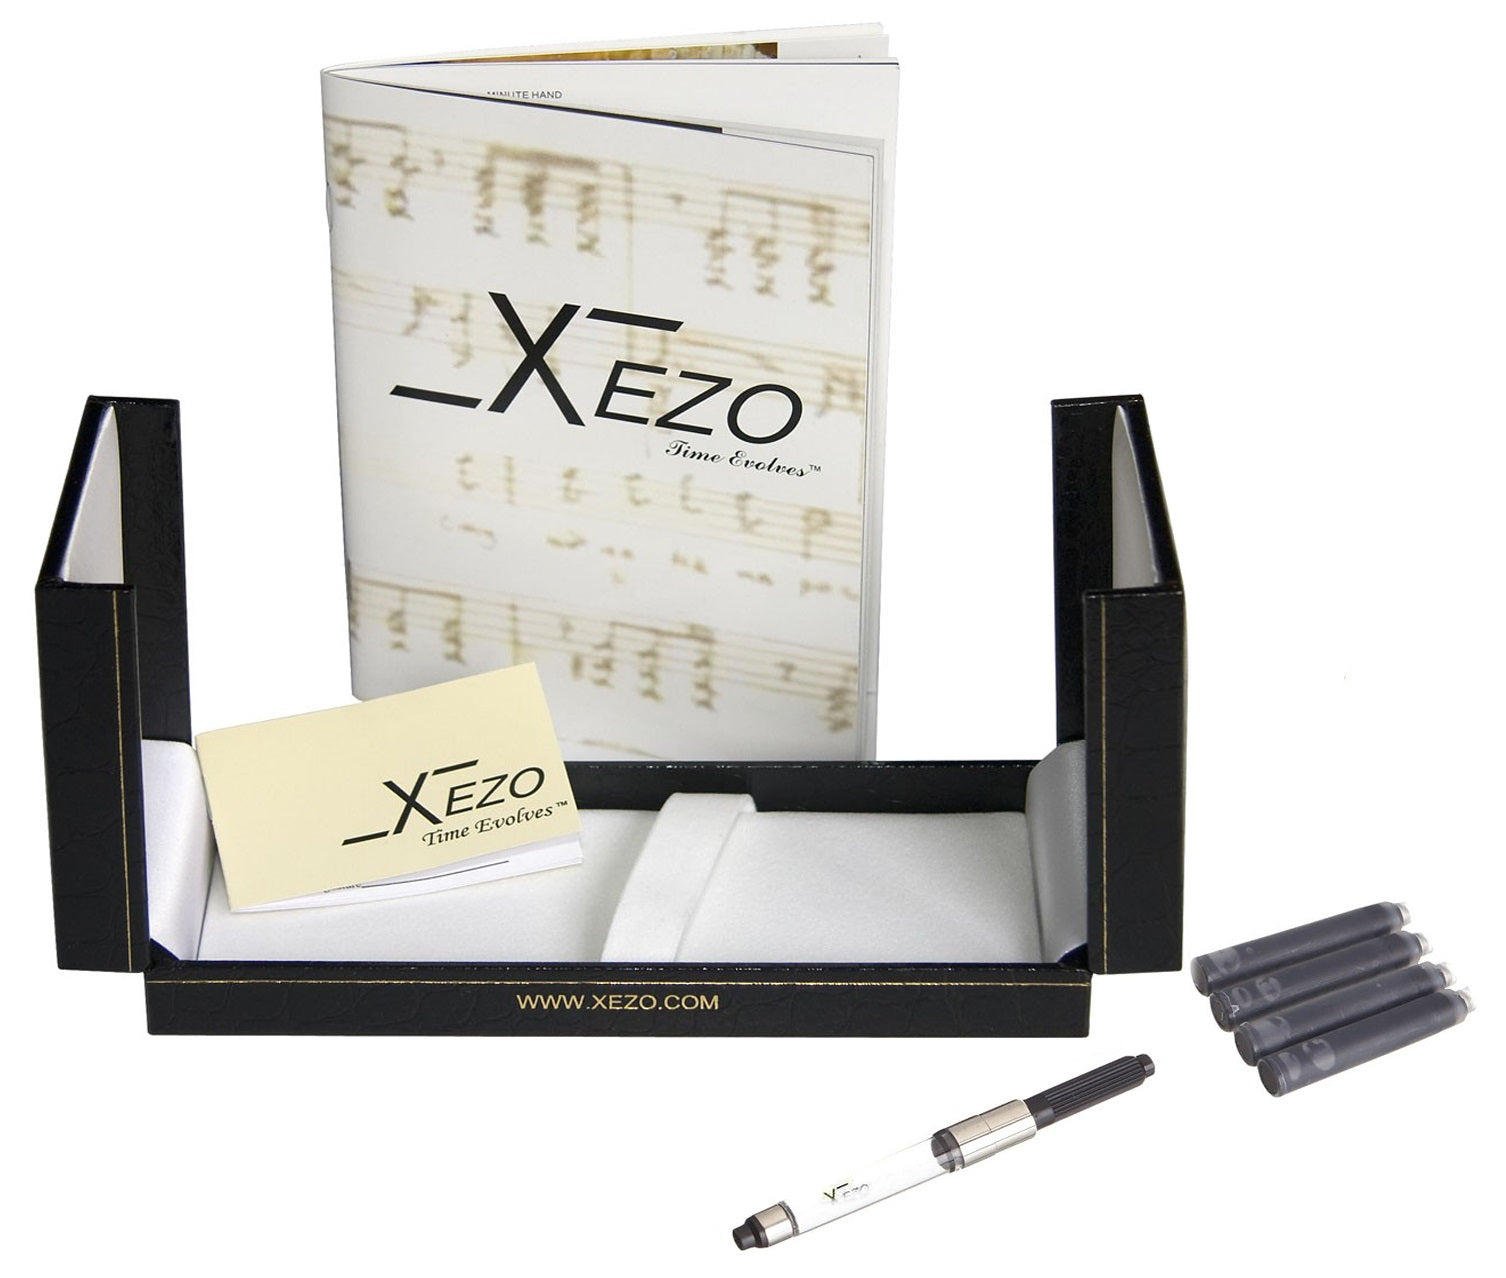 Xezo - Black gift box, certificate, manual, chrome-plated ink converter, and four ink cartridges of the Maestro 925 BL MOP FMG fountain pen